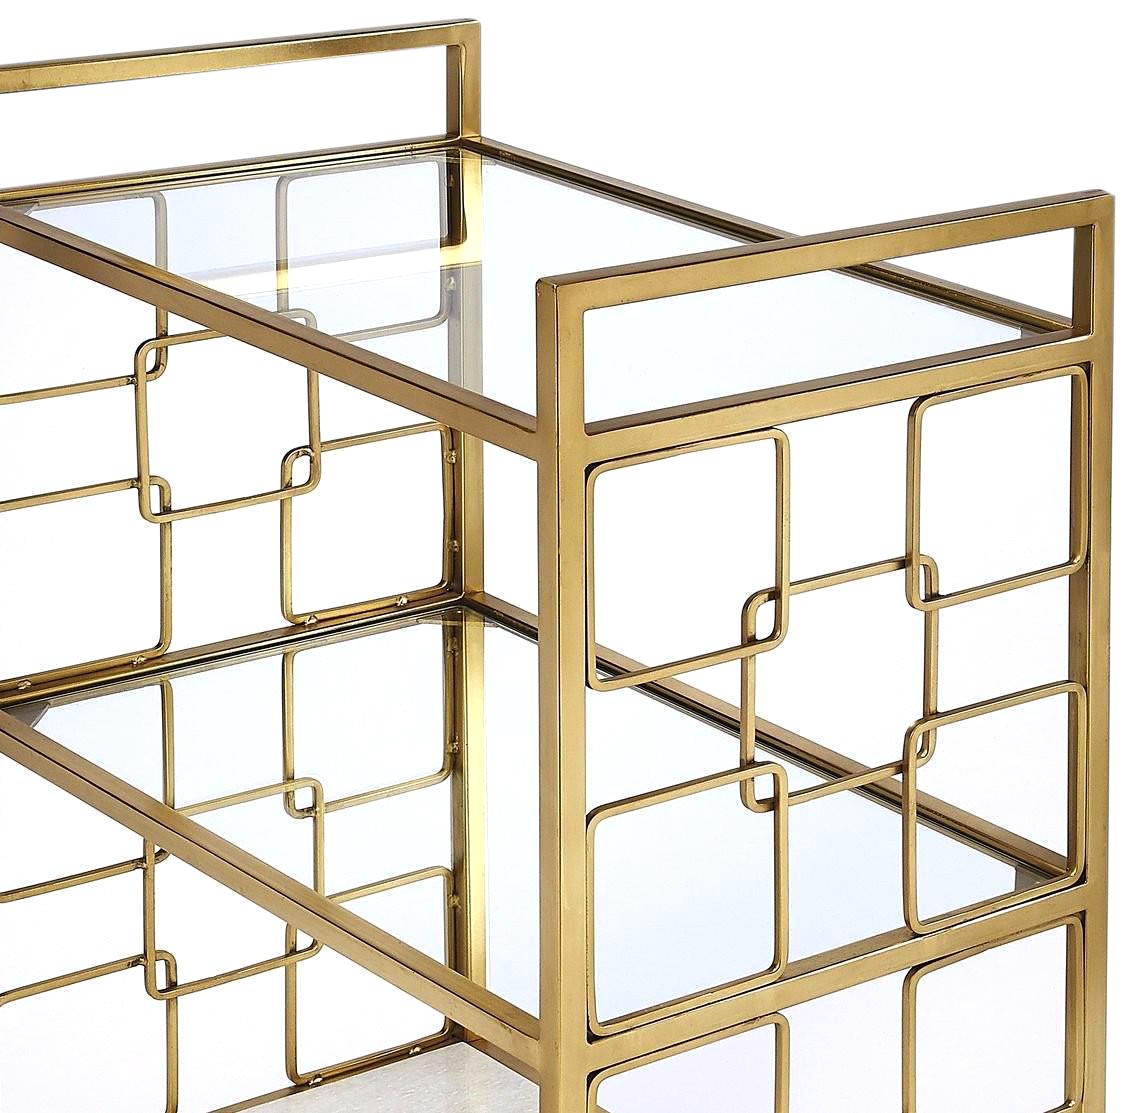 Bar Cart Modern Contemporary Distressed Polished Gold Shiny Brass White Glass-Image 4